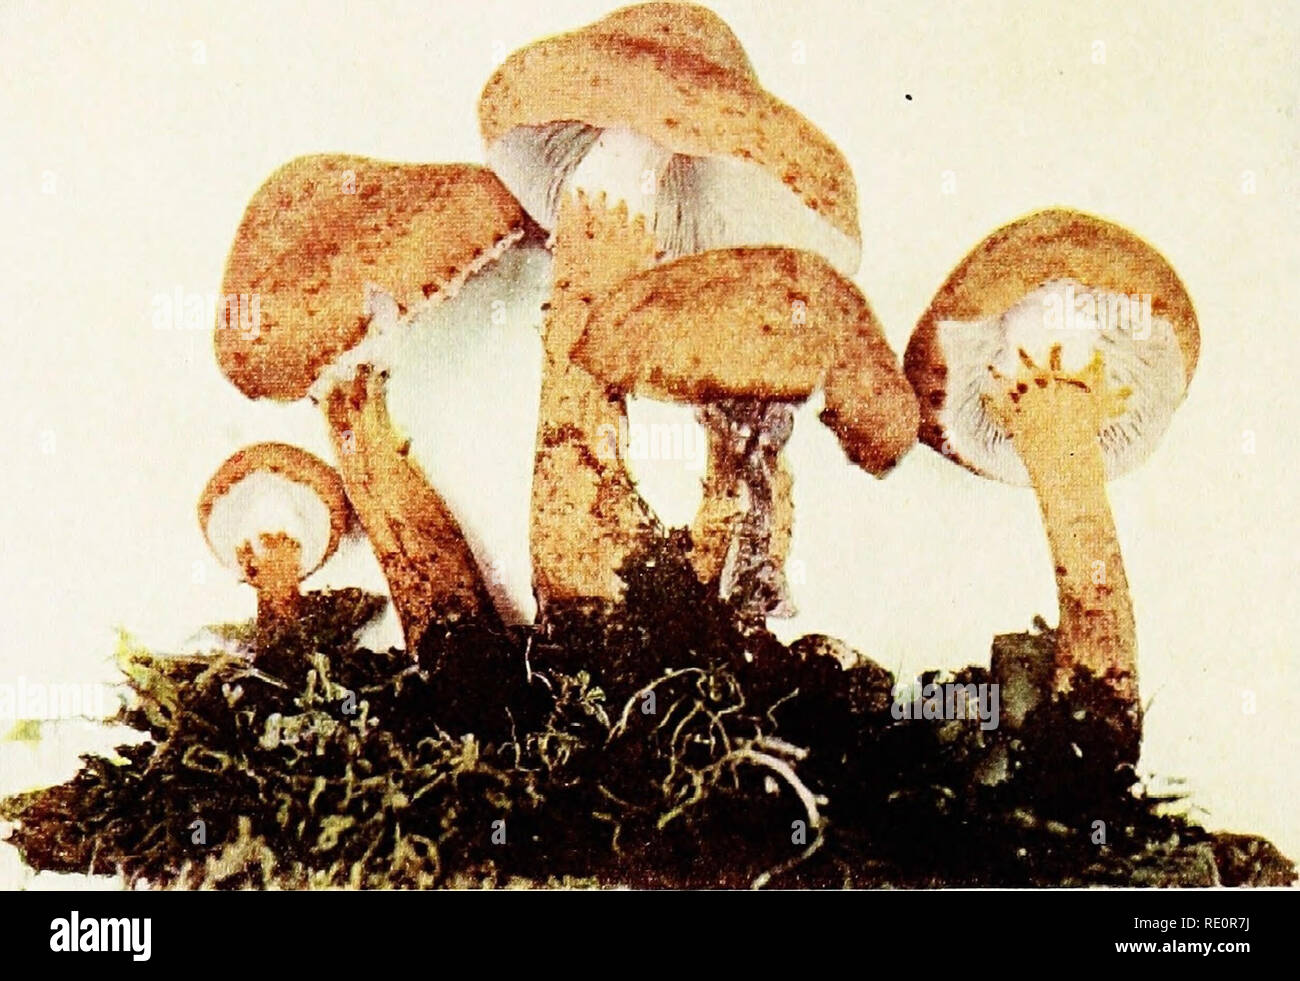 . The mushroom book : a popular guide to the identification and study of our commoner Fungi, with special emphasis on the edible varieties . Mushrooms; Mushrooms, Edible; Cookery (Mushrooms); cbk. Lepiota Friesii, Lasch. (edible). See page 65. ..,,,,.... ...^^  . 1 1 i 1 i 1 ,.^-- %^:-^ # w. â -^y .aiL .^UIK'W^k i j/ci WB^^j? 1 Li  â *â¢- â J^J^ 1 m wk-: ; :^v^ -â â :^Â»-&quot;'''' ^' ' 1. -'â â â ^â .^im ^â Ki^ibi-^..' .--'-'â ' -^ &quot;* ' ' ^ 1 â '''^:-rm 6; T'^'-j . ^ /--W^-u ^ 'M X Cortinarius alboviolaceus, Fr. Reduced. See page 86.. Please note that these images are extracted from scan Stock Photo